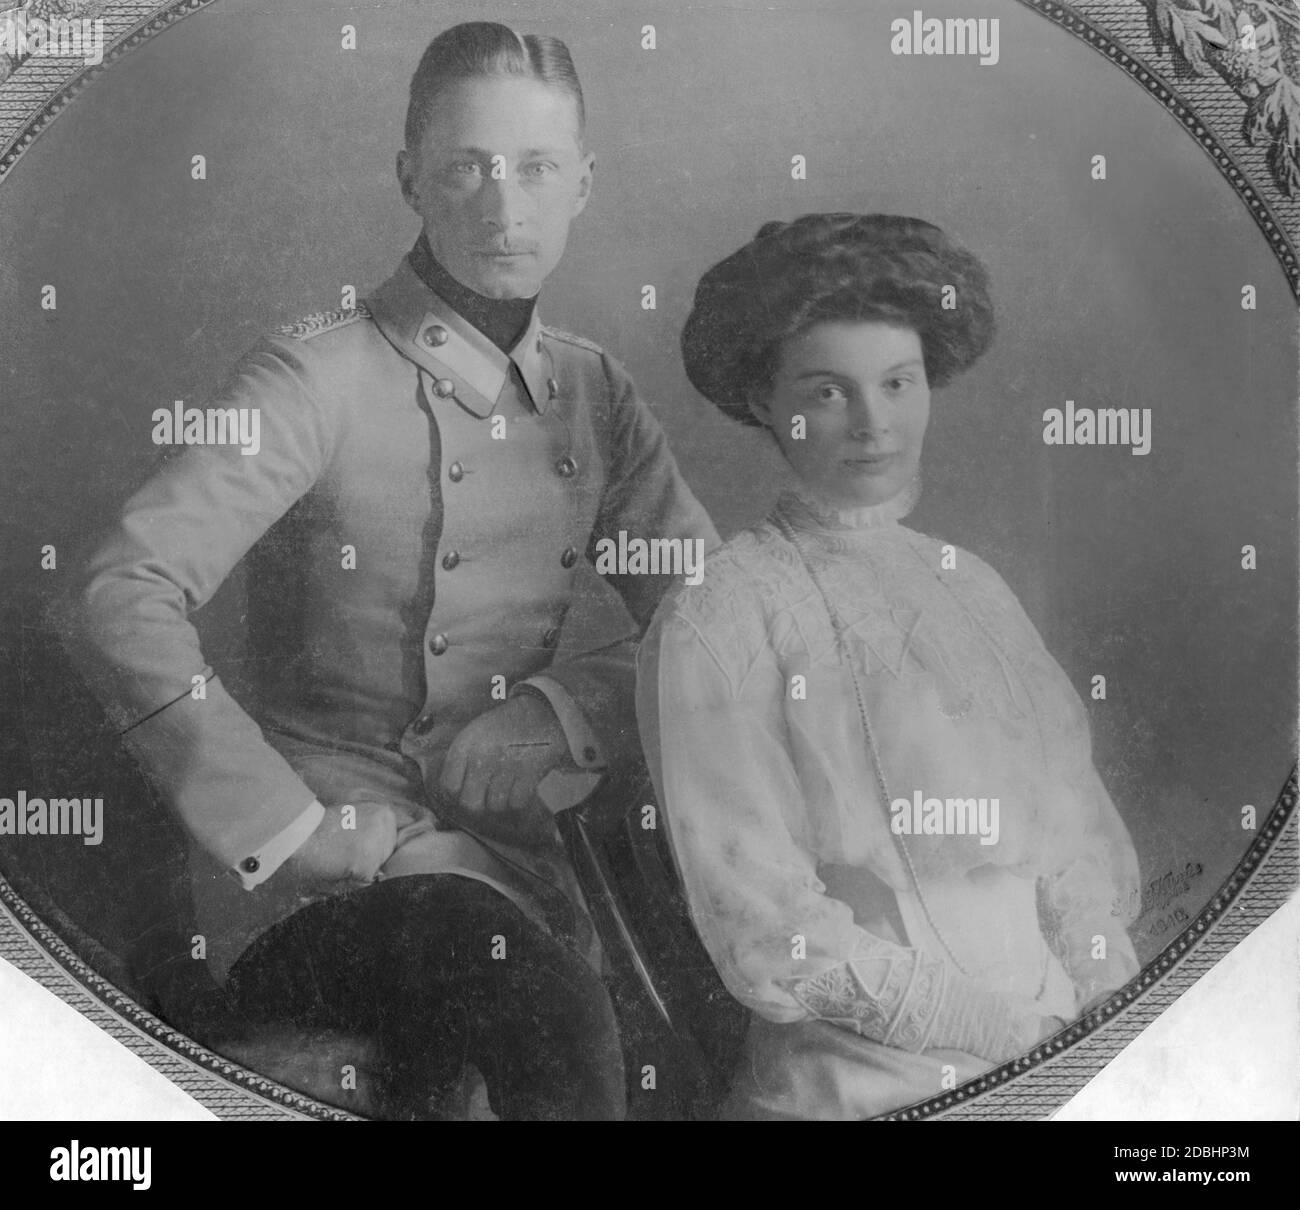 Crown Prince Wilhelm of Prussia and Crown Princess Cecilie of Mecklenburg in 1910. Photo by the royal court photographers Selle and Kuntze from Potsdam. Stock Photo